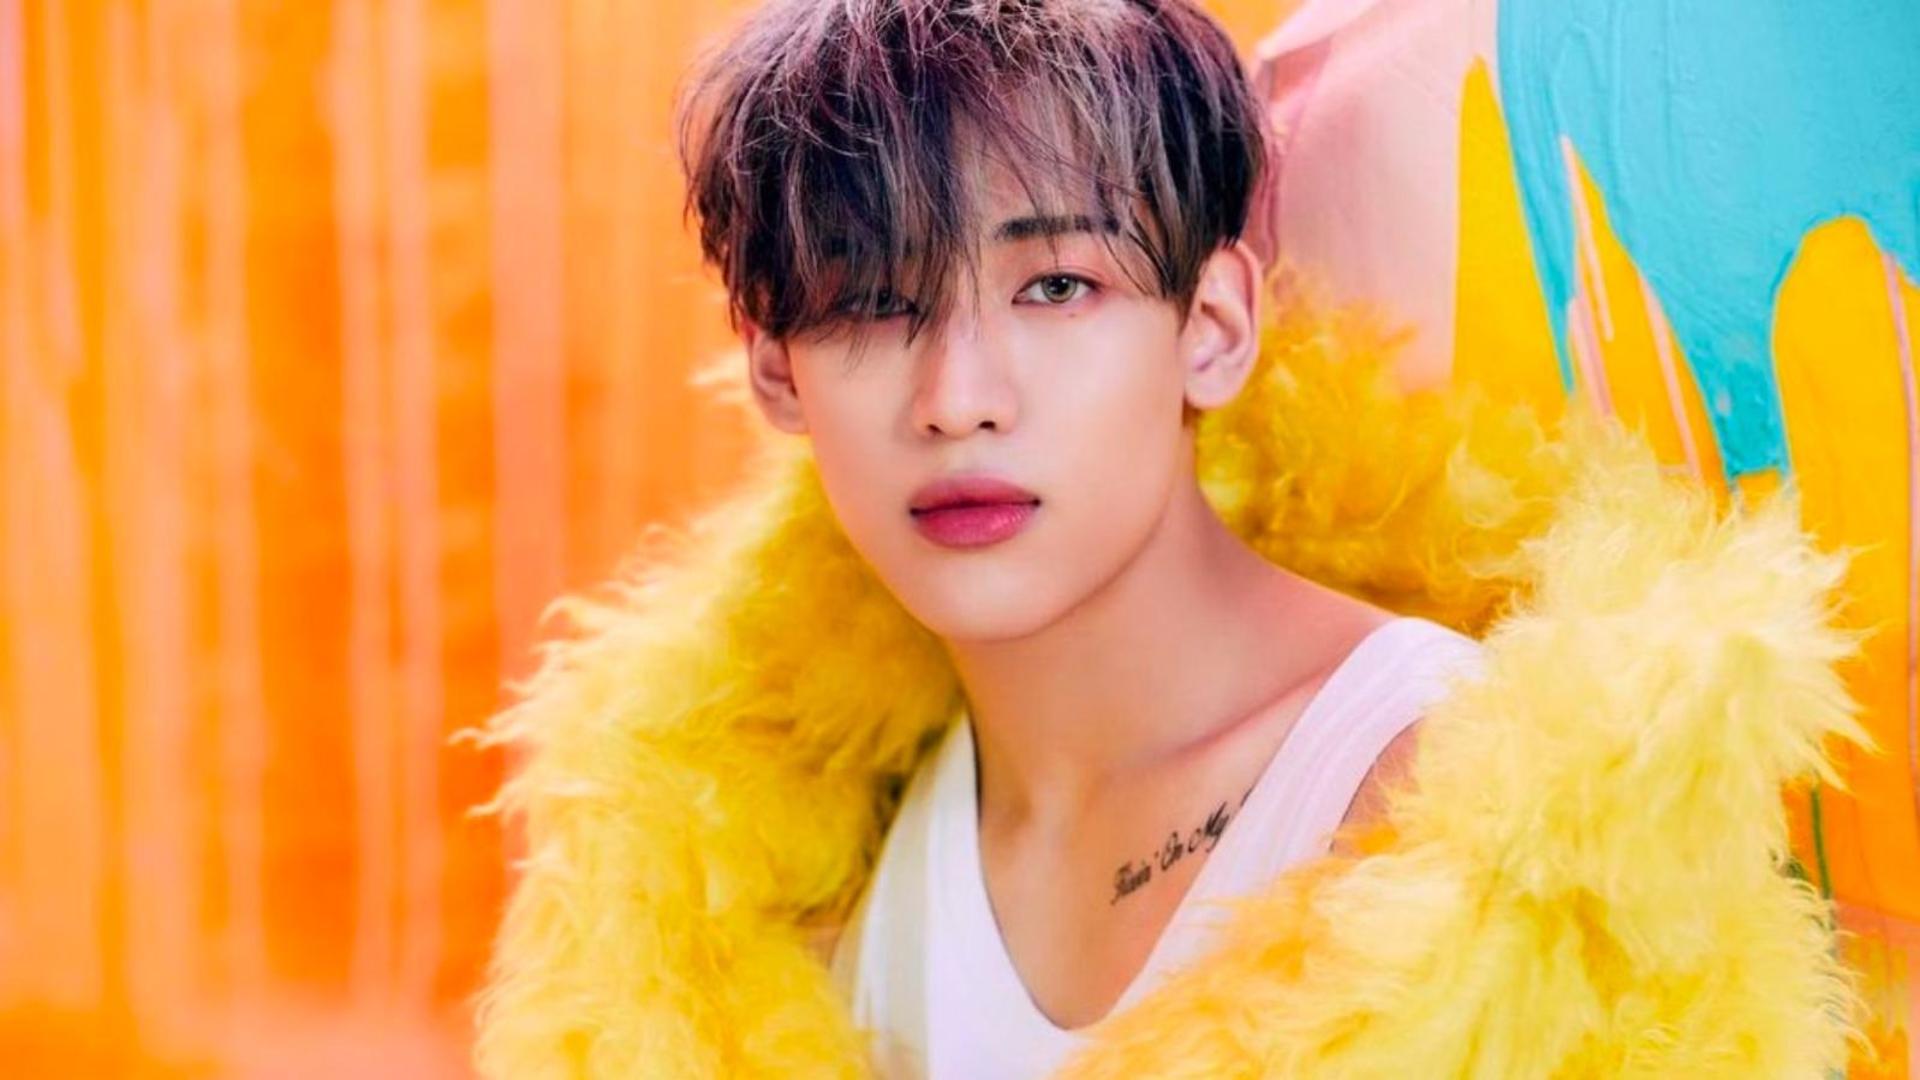 GOT7 BamBam confirms long-awaited solo comeback in March; details inside 